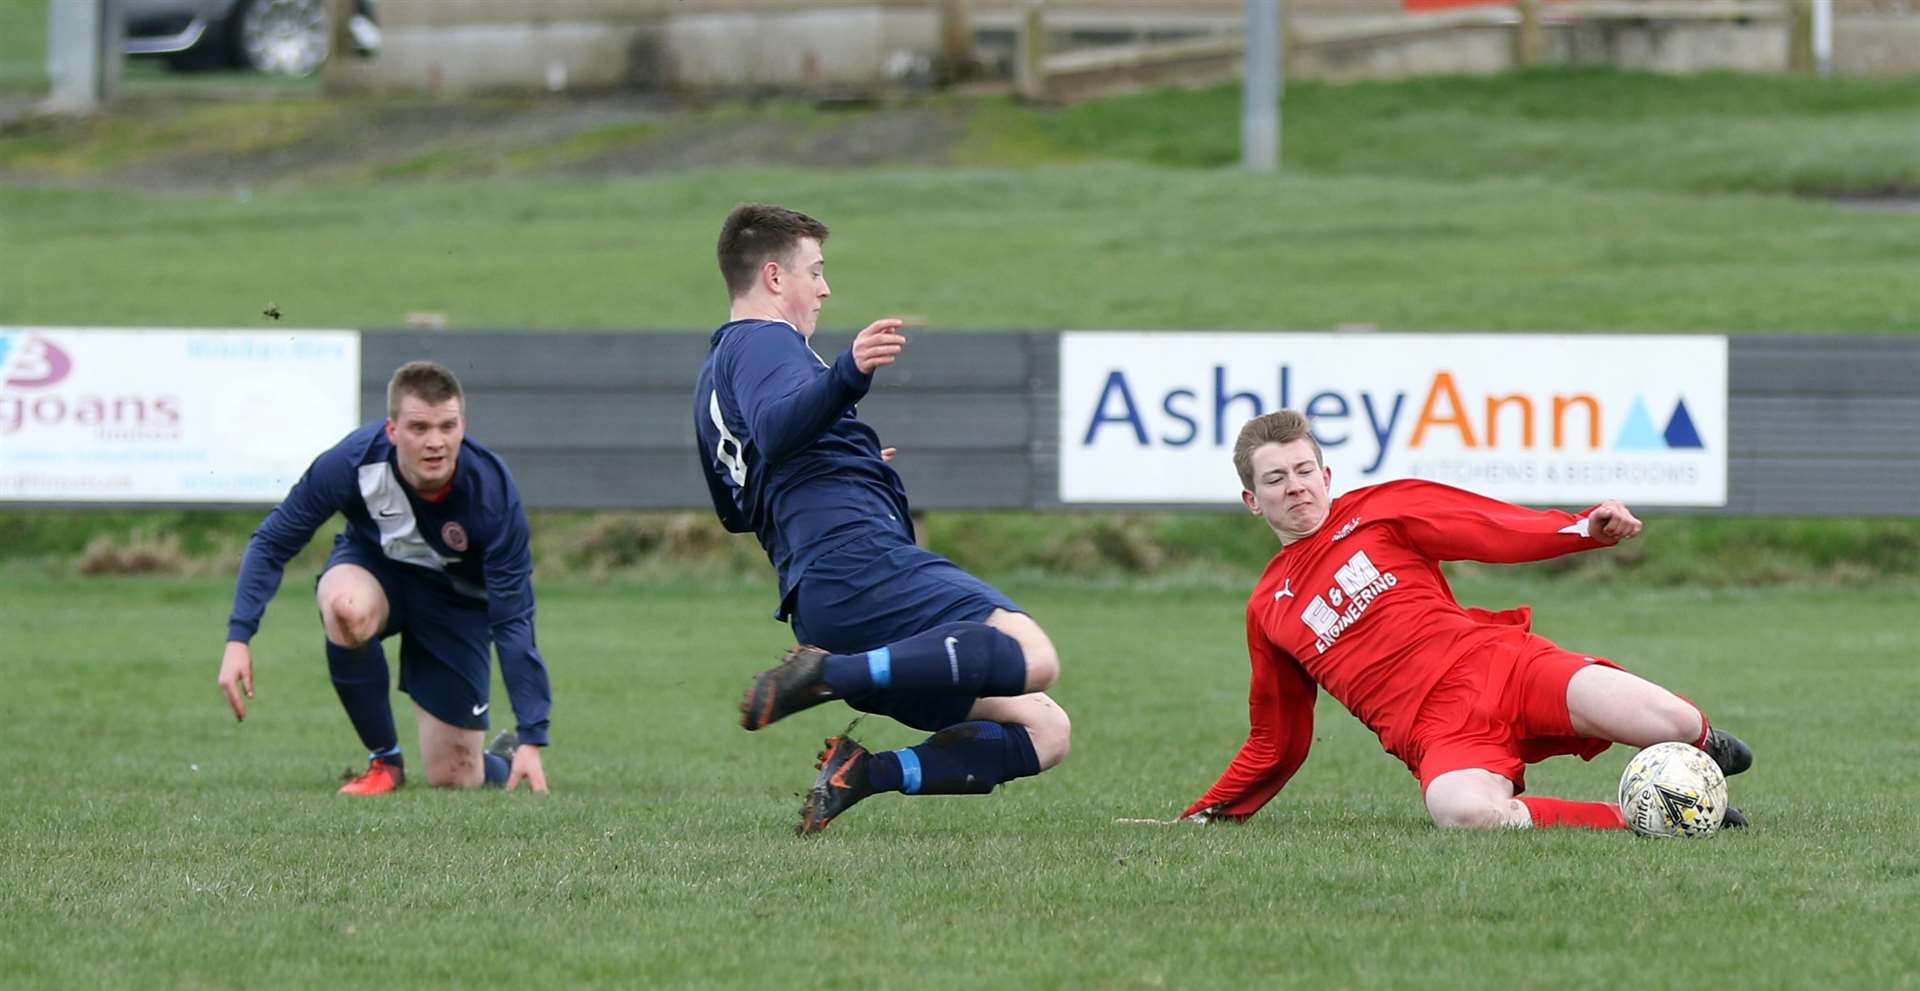 Steven Sutherland flies in with a tackle on Innes Mackintosh during a recent North Caledonian league derby between Halkirk United and Thurso. Both teams will be looking for an improvement next term. Picture: James Gunn